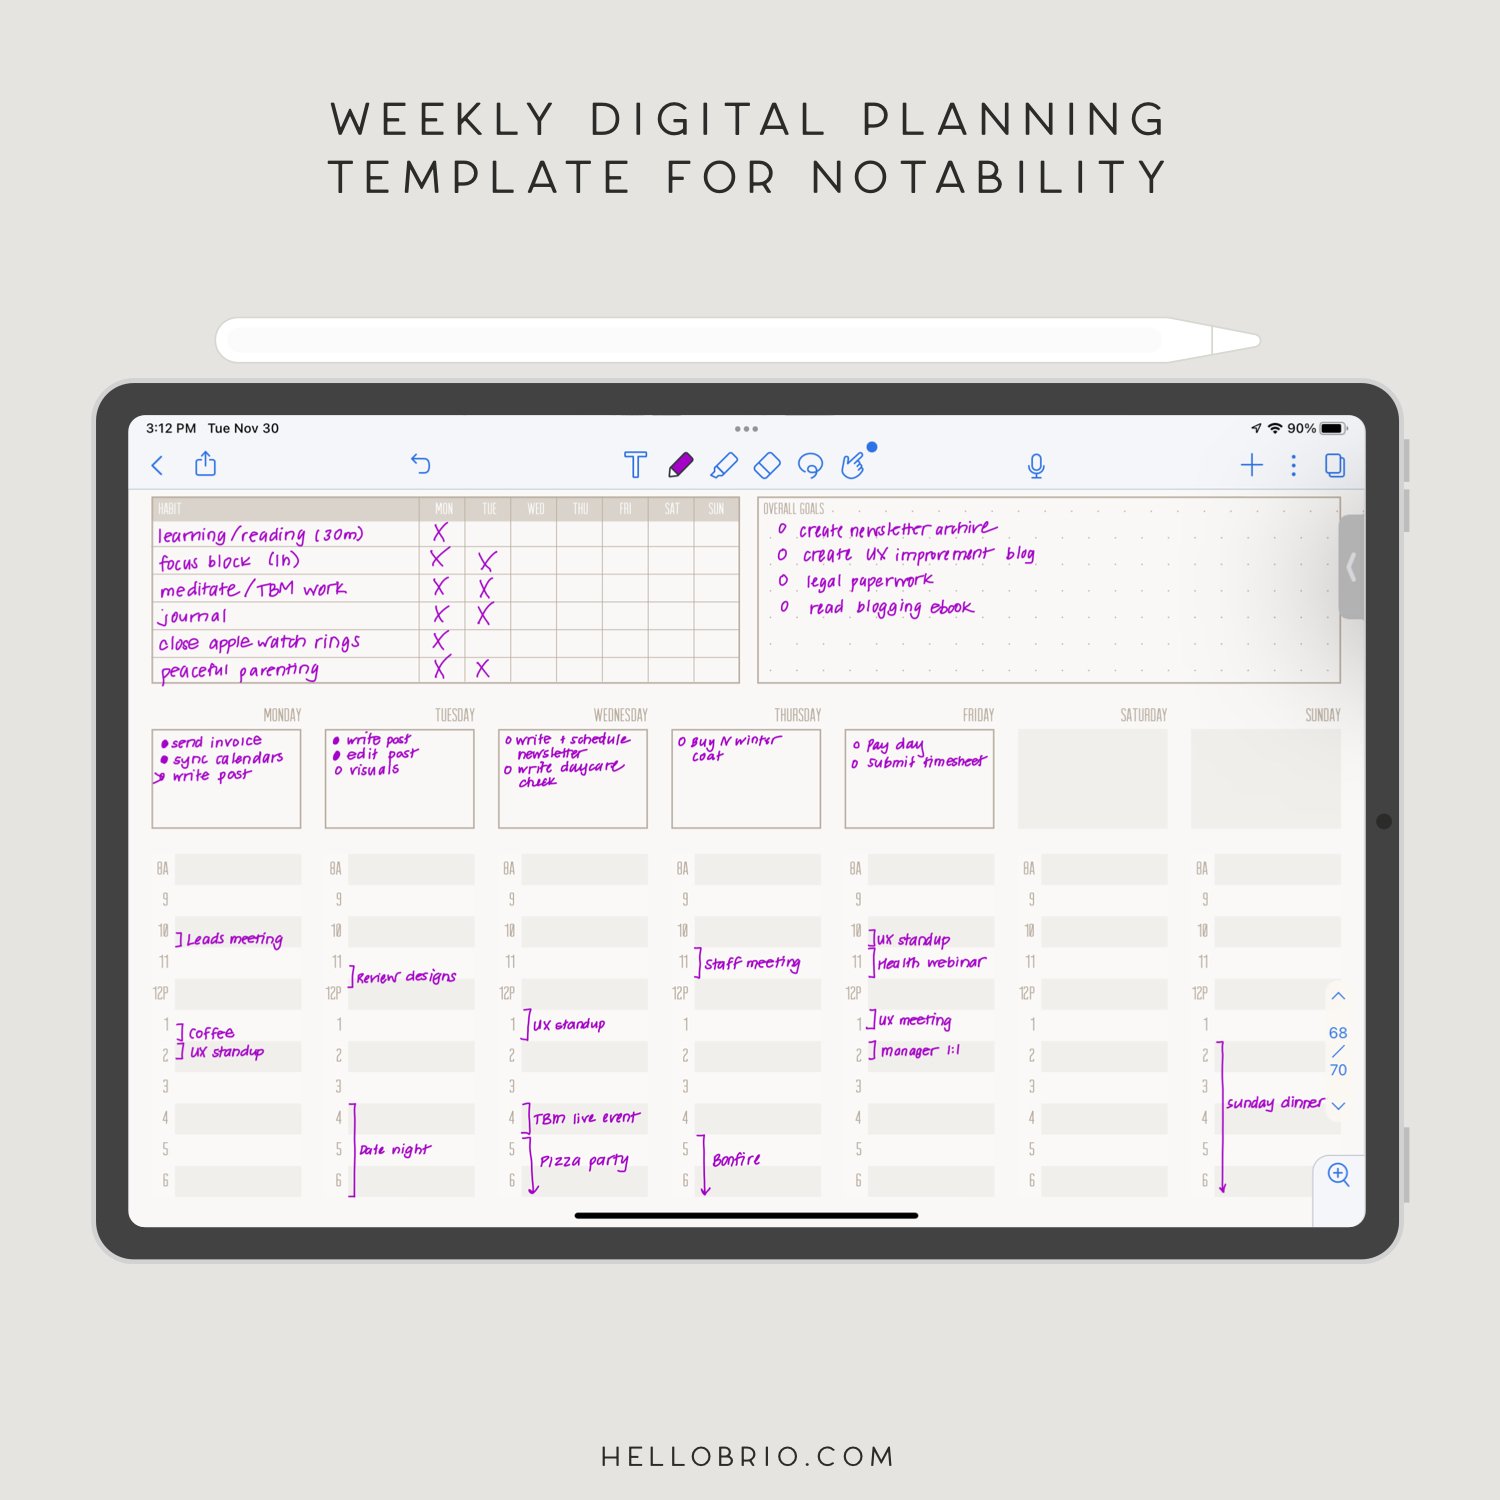 digital-planning-with-a-weekly-template-for-notability-on-ipad-hello-brio